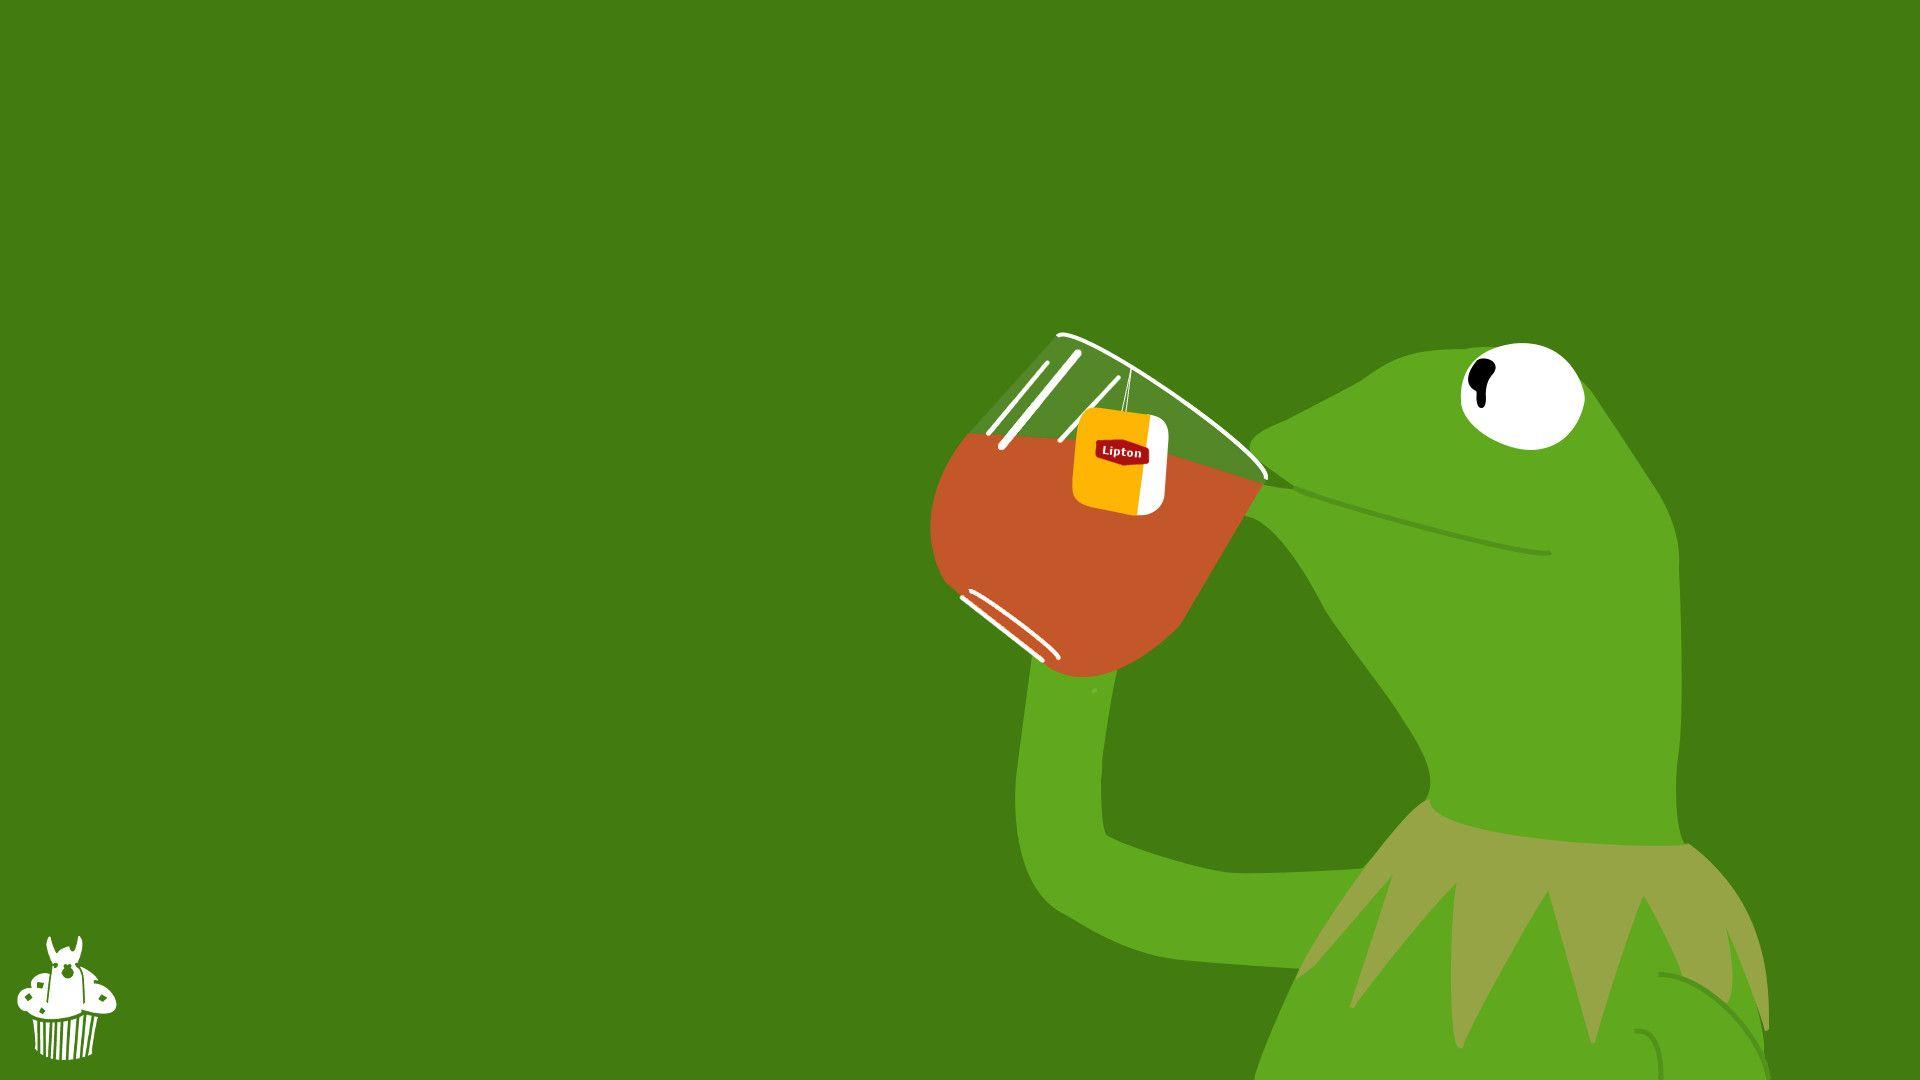 Kermit the Frog Wallpaper Free Kermit the Frog Background